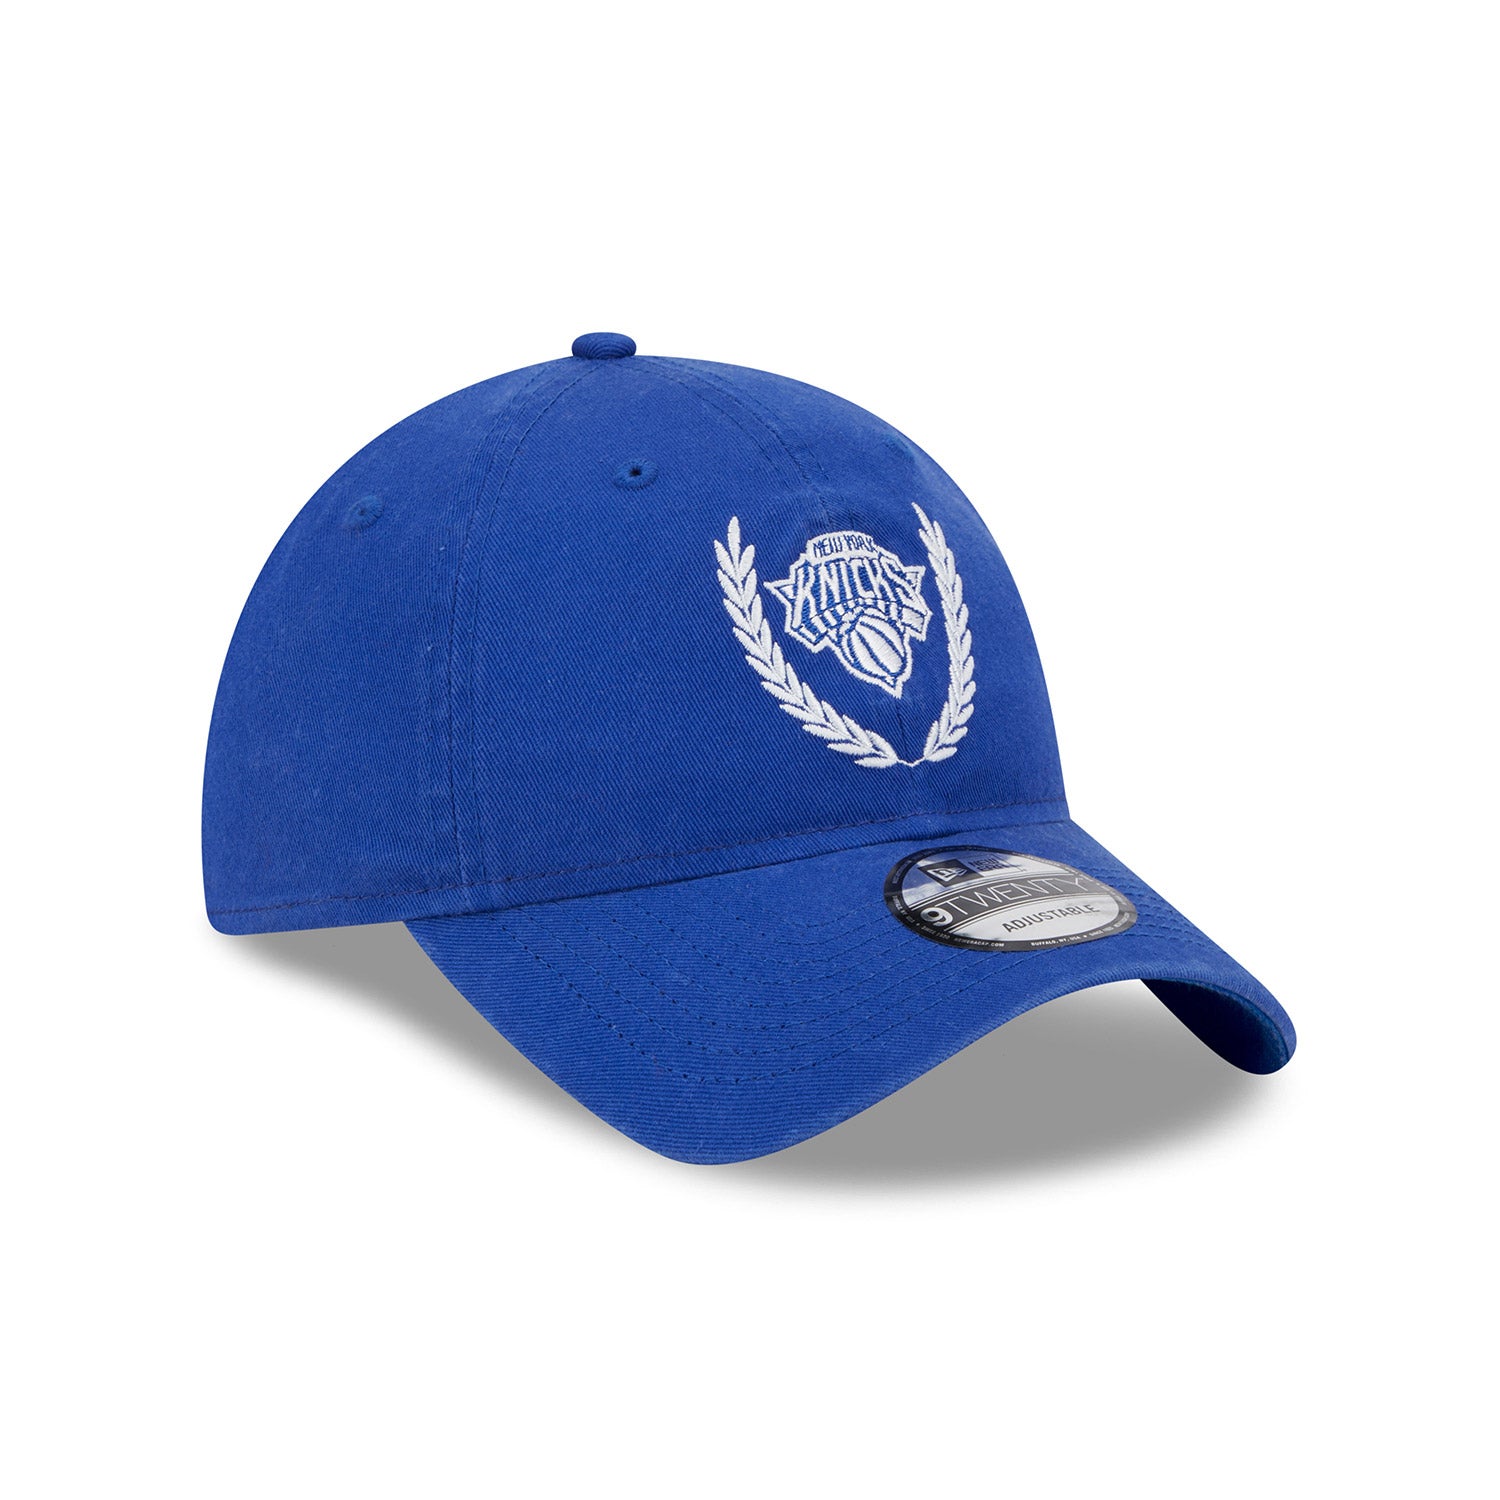 New Era Knicks Golf Royal Leaves Adjustable Hat In Blue - Angled Right Side View